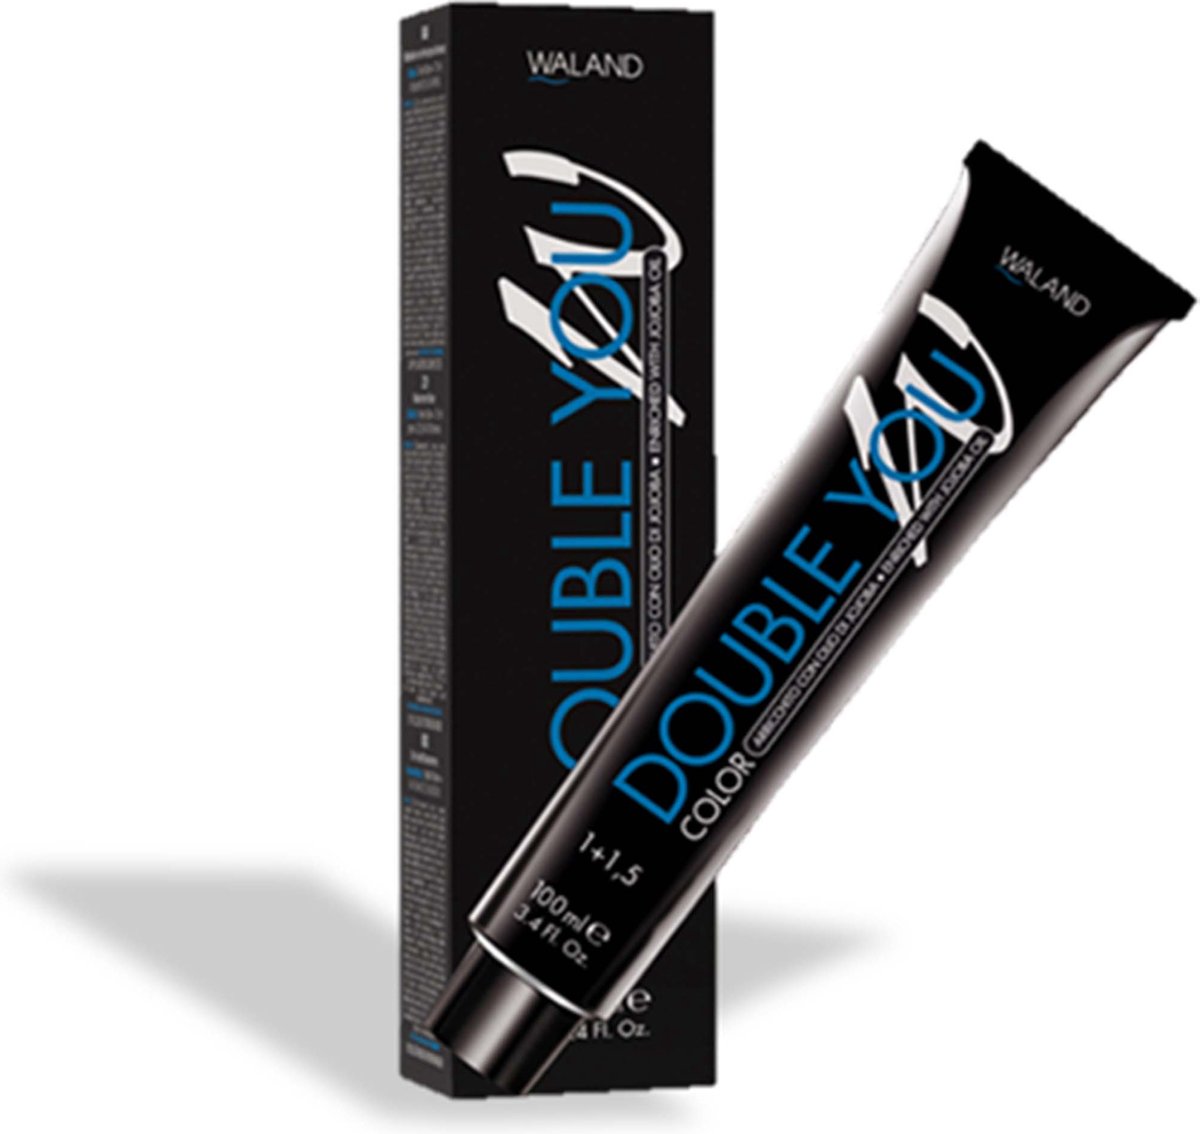 Waland Double You 8.0i Intens Lichtblond 100ml